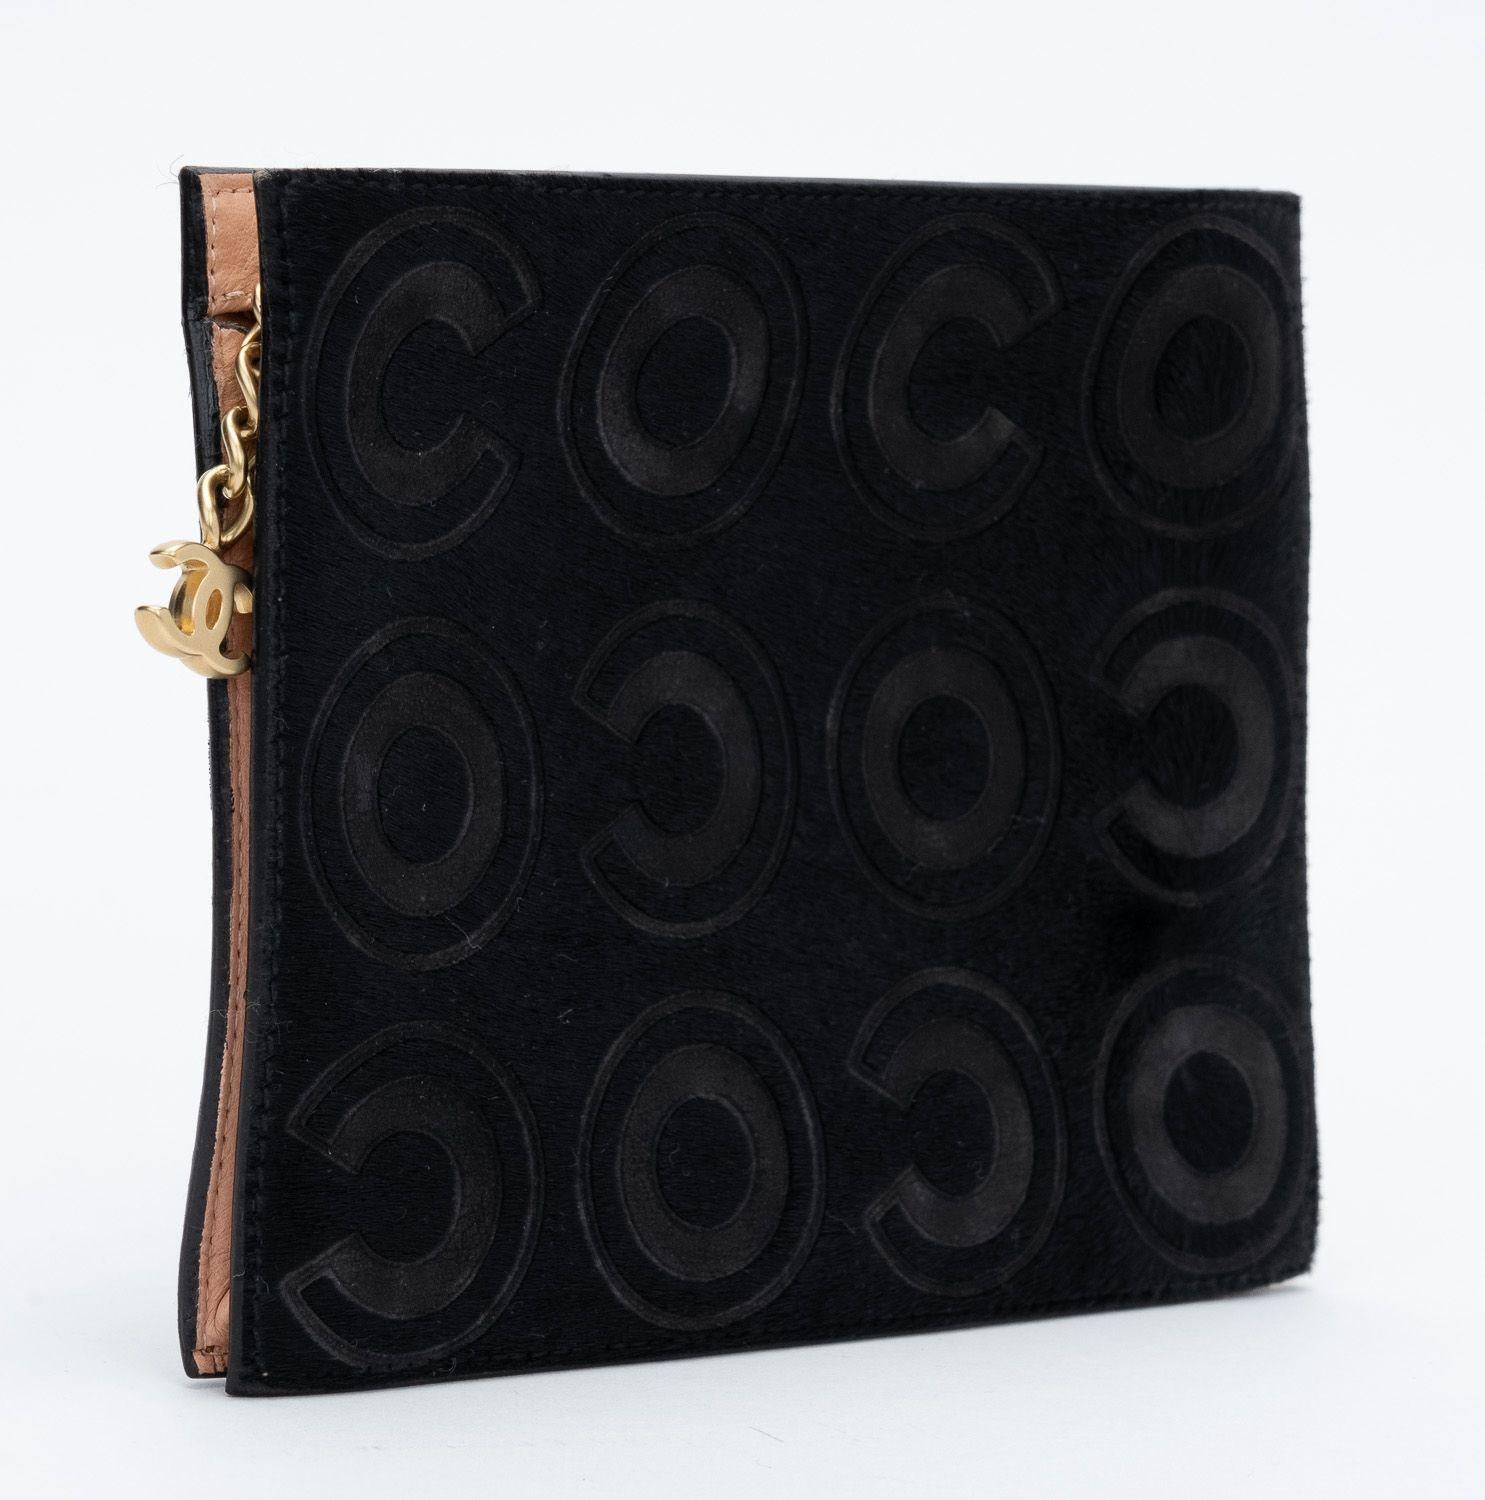 Chanel black pony hair coco pouch.Pink leather lining.
Made in Italy. Collection 6. Comes with hologram and original dust cover.